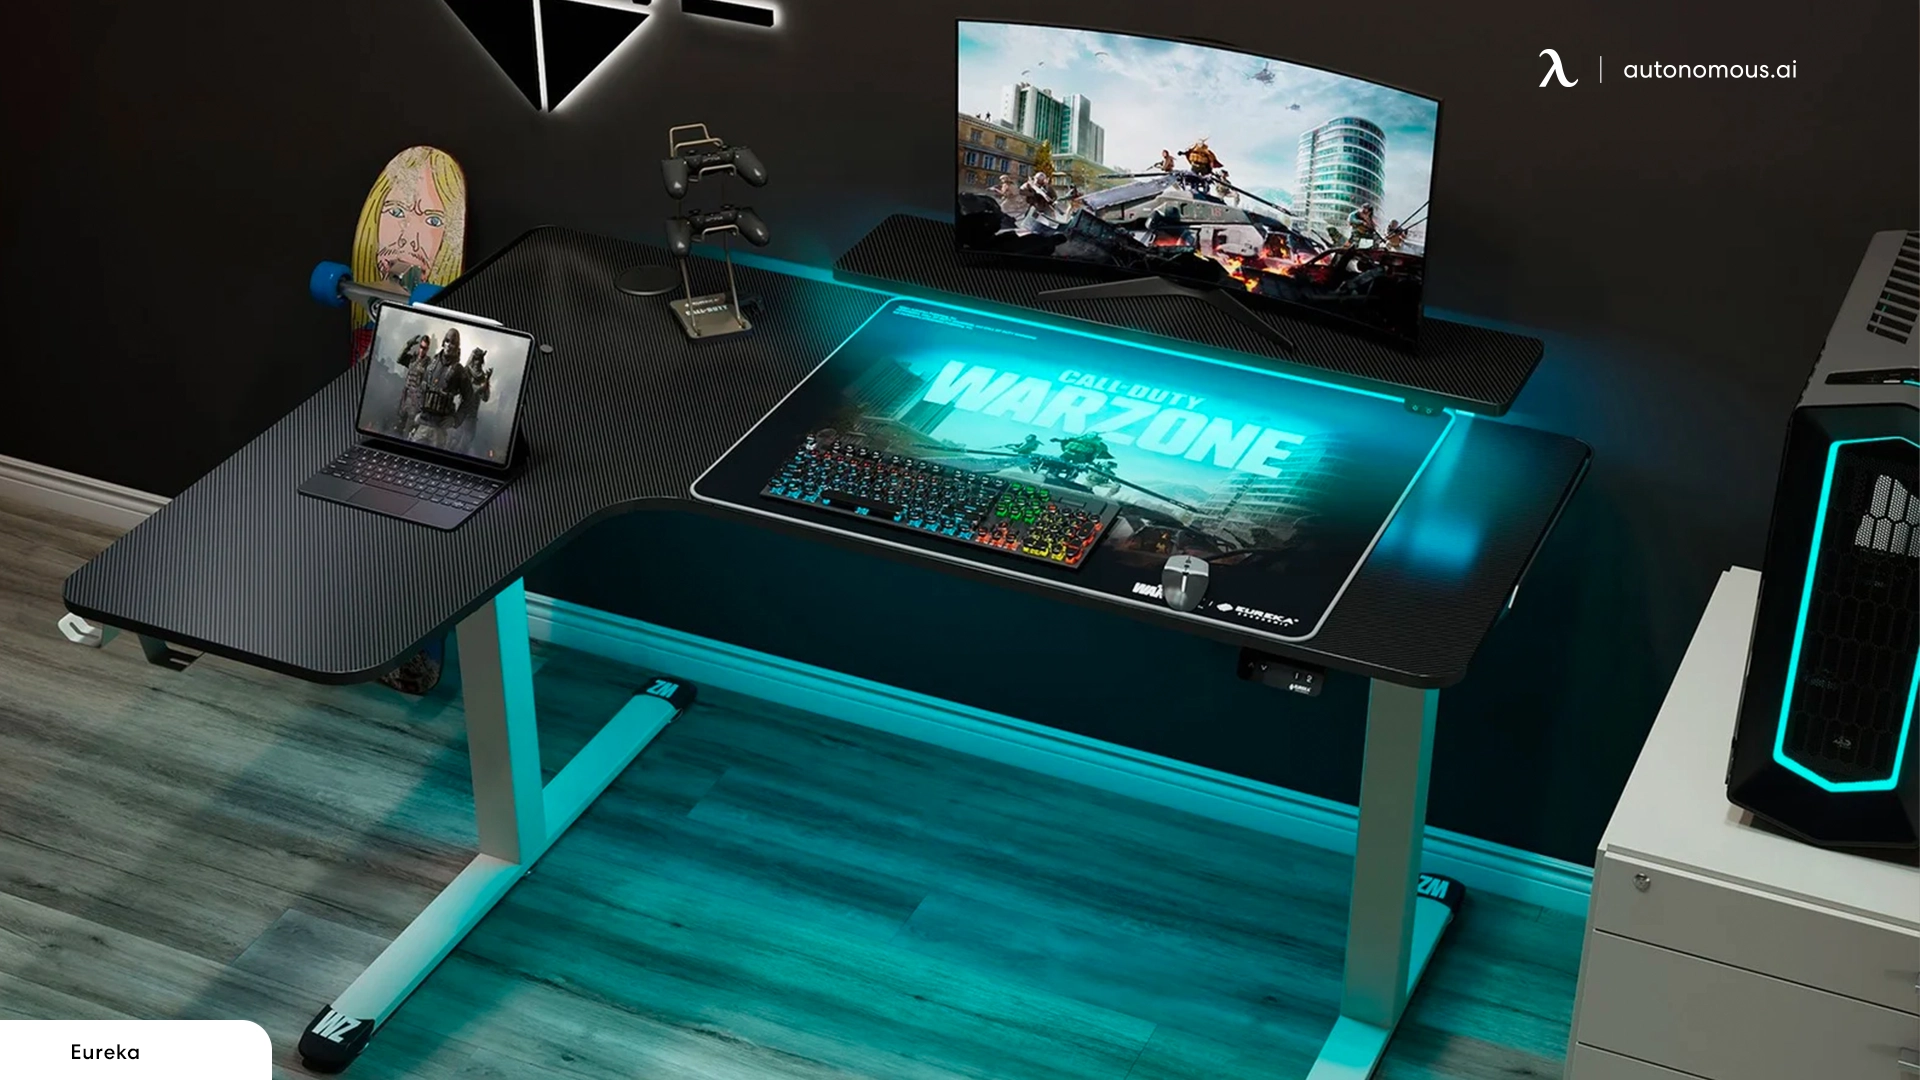 Home Entertainment Systems with L-shaped wooden desk